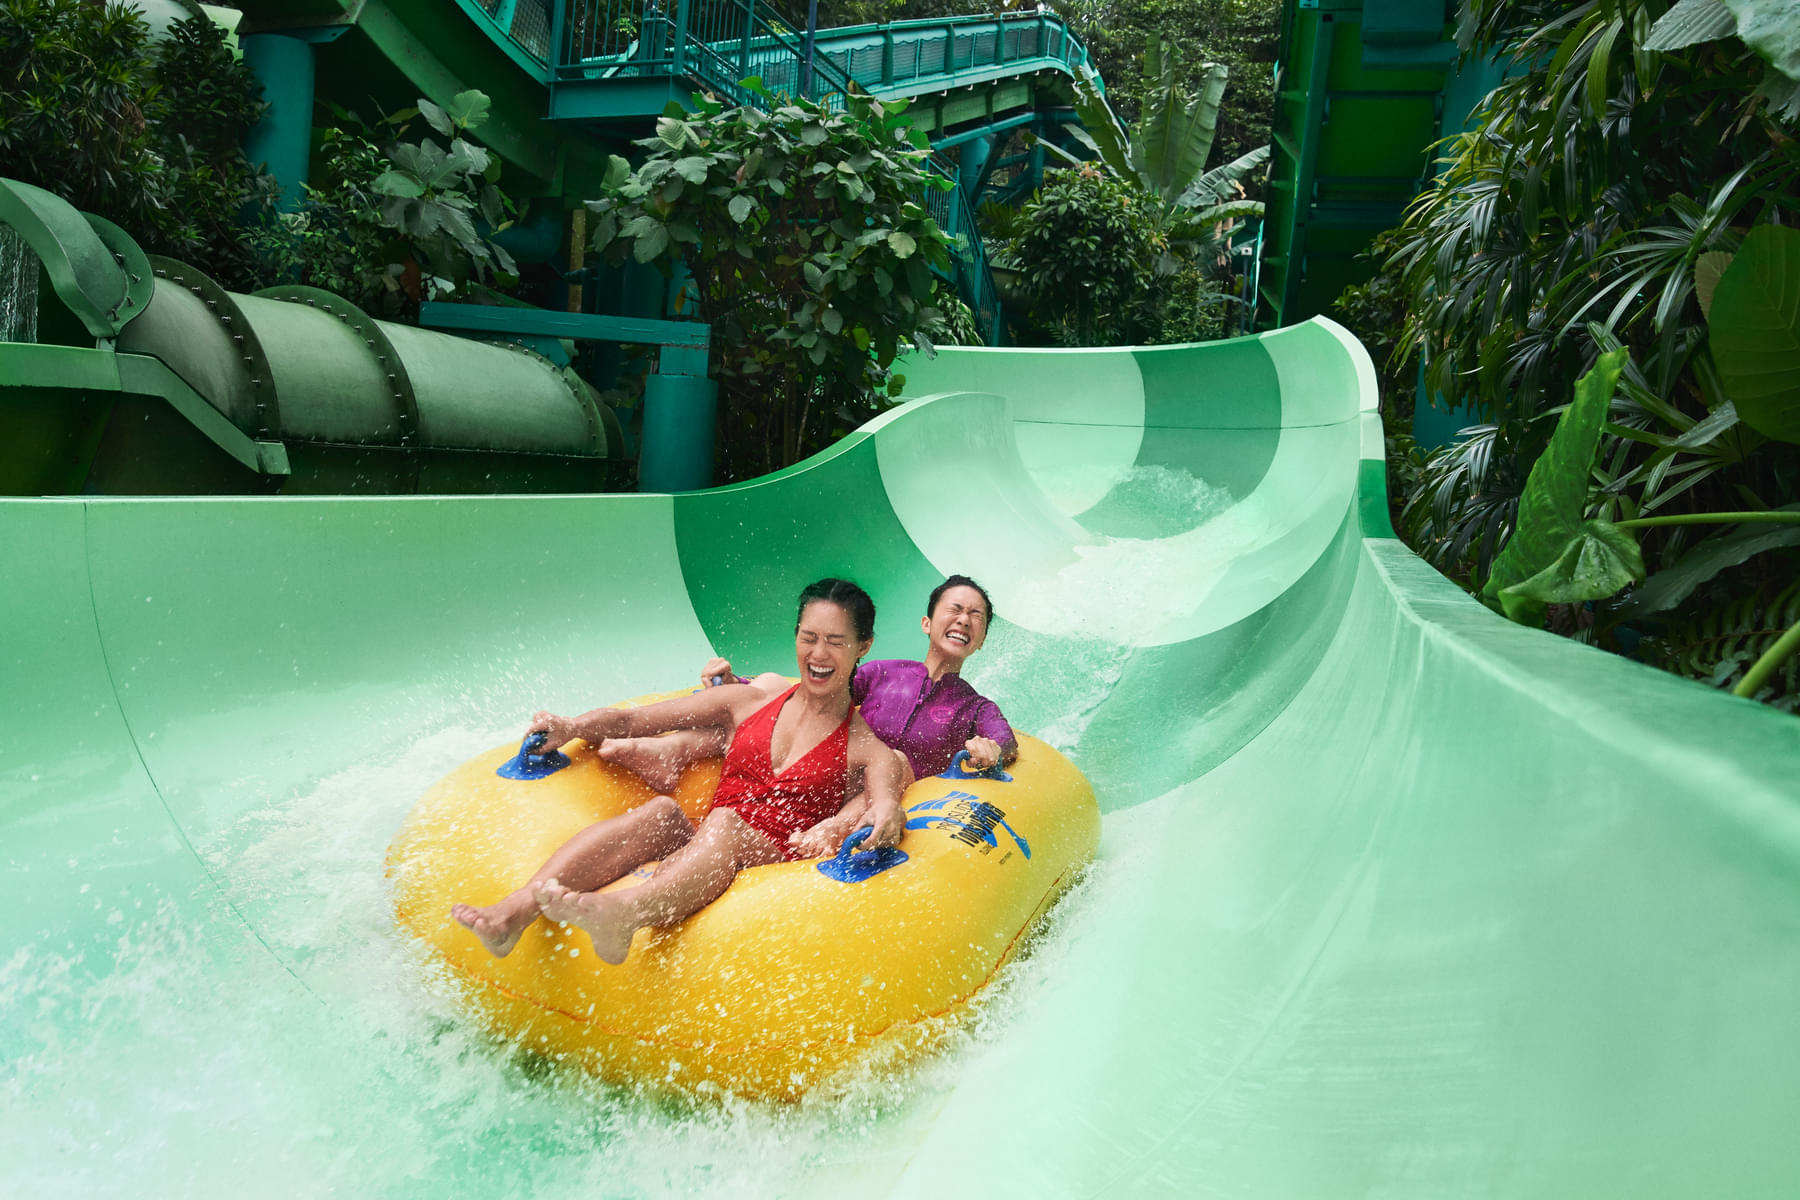 Feel the thrill as you enjoy adventurous water rides